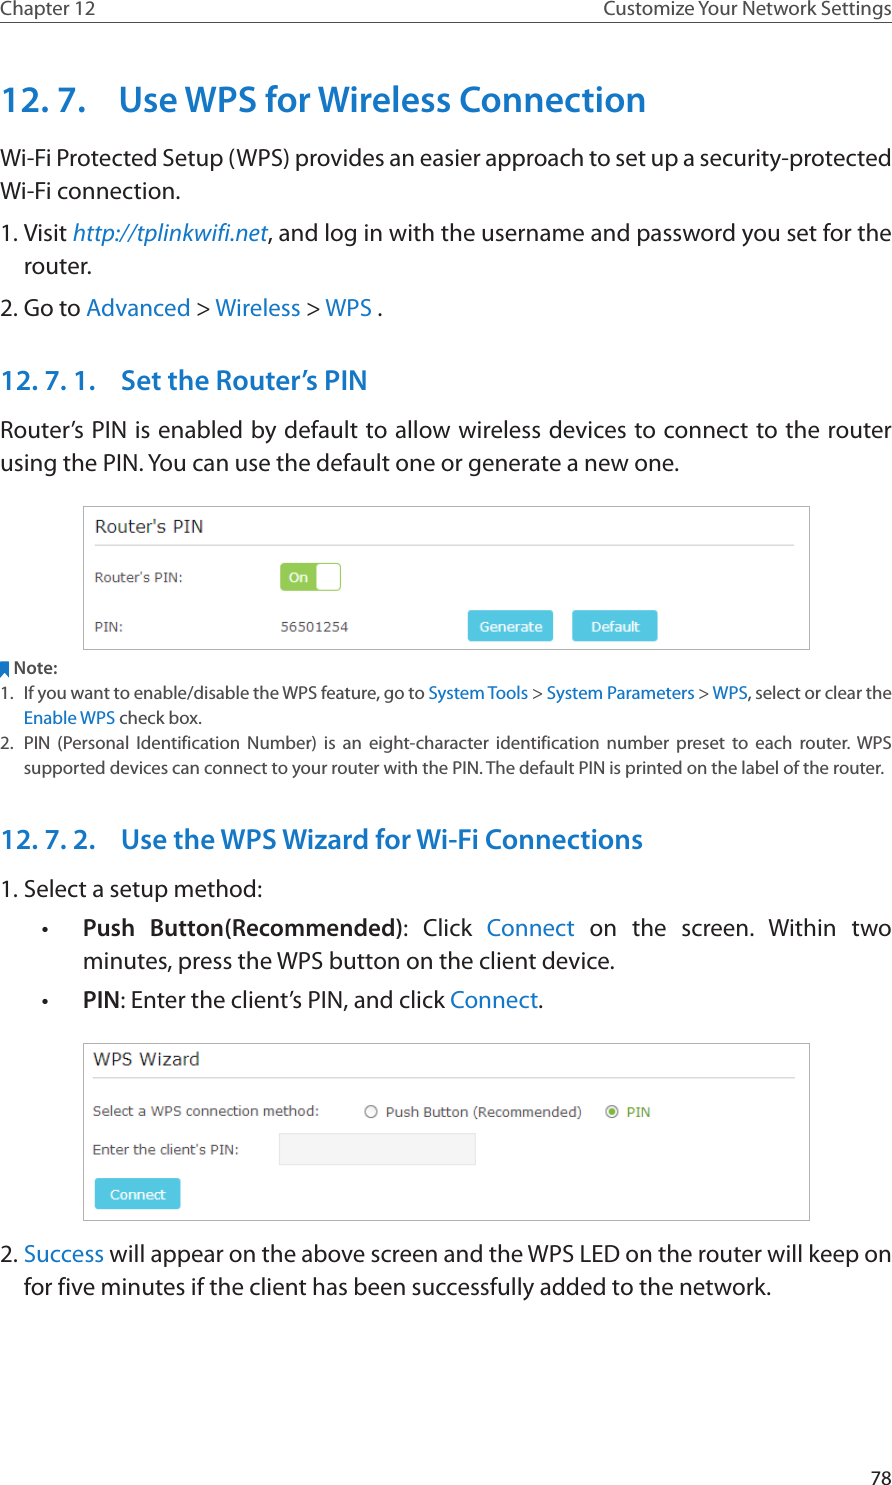 78Chapter 12 Customize Your Network Settings12. 7.  Use WPS for Wireless ConnectionWi-Fi Protected Setup (WPS) provides an easier approach to set up a security-protected Wi-Fi connection.1. Visit http://tplinkwifi.net, and log in with the username and password you set for the router.2. Go to Advanced &gt; Wireless &gt; WPS .12. 7. 1.  Set the Router’s PINRouter’s PIN is enabled by default to allow wireless devices to connect to the router using the PIN. You can use the default one or generate a new one.Note:1.  If you want to enable/disable the WPS feature, go to System Tools &gt; System Parameters &gt; WPS, select or clear the Enable WPS check box.2.  PIN (Personal Identification Number) is an eight-character identification number preset to each router. WPS supported devices can connect to your router with the PIN. The default PIN is printed on the label of the router.12. 7. 2.  Use the WPS Wizard for Wi-Fi Connections1. Select a setup method: •  Push Button(Recommended): Click Connect on the screen. Within two minutes, press the WPS button on the client device.•  PIN: Enter the client’s PIN, and click Connect.2. Success will appear on the above screen and the WPS LED on the router will keep on for five minutes if the client has been successfully added to the network.